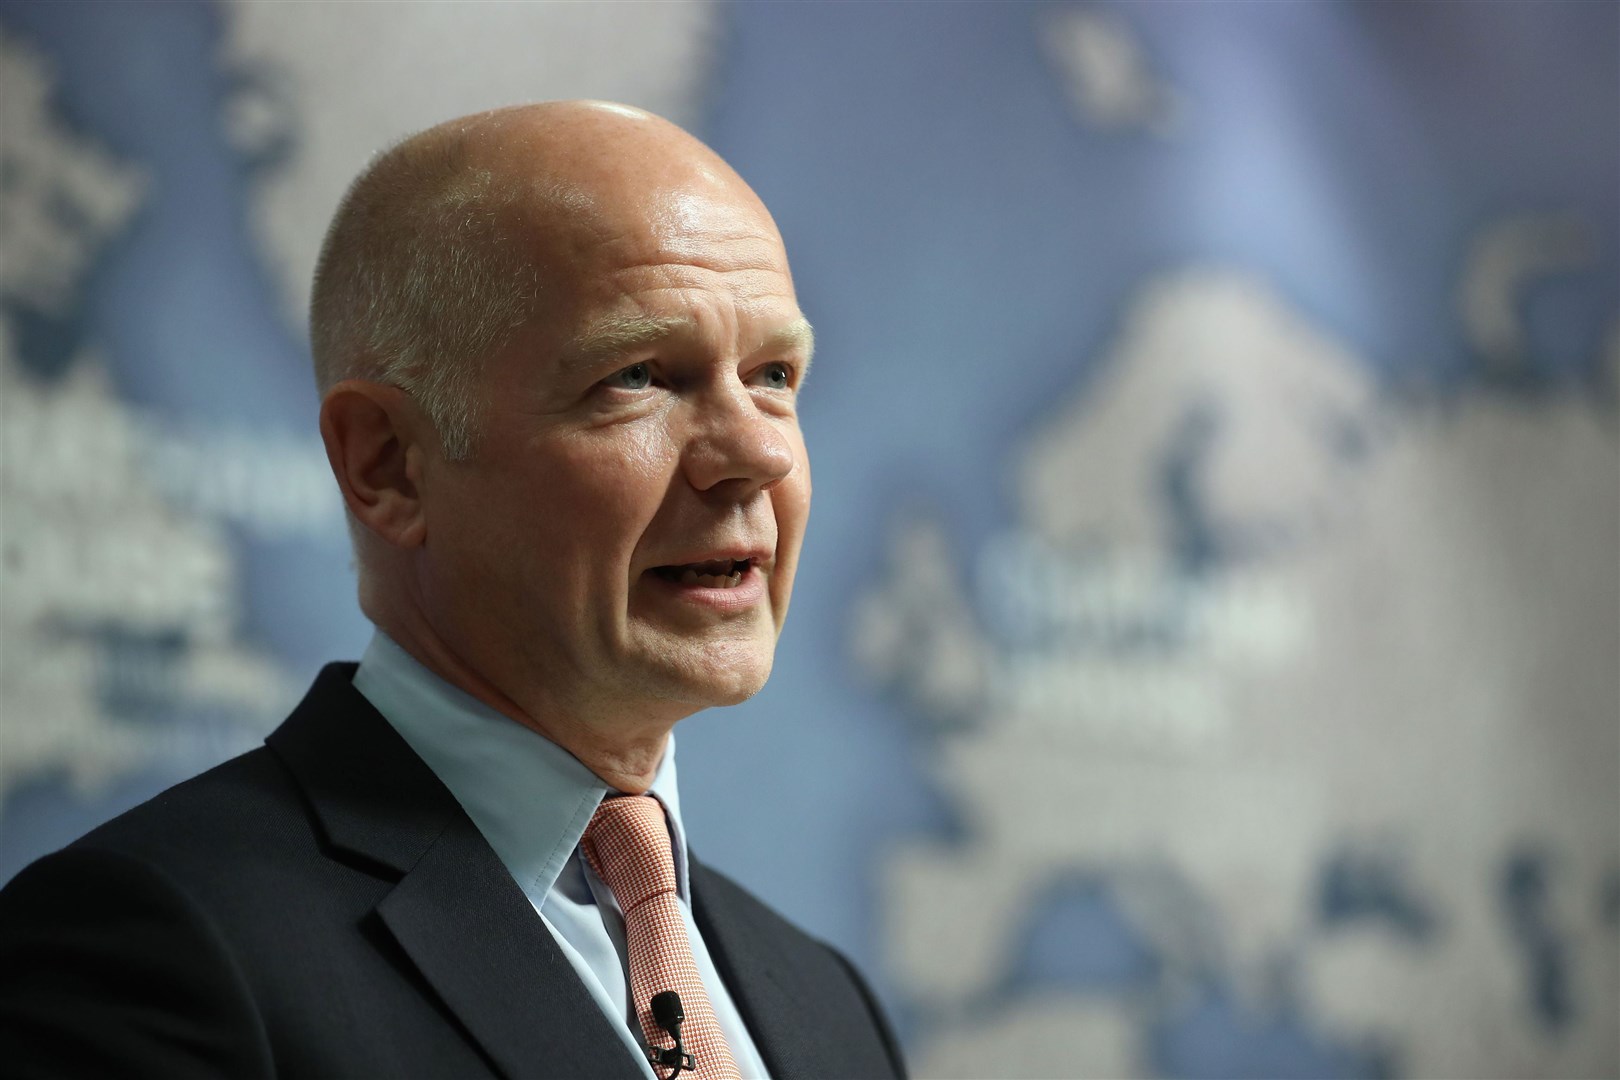 Lord Hague said the Prime Minister was in ‘real trouble’ (Dan Kitwood/PA)